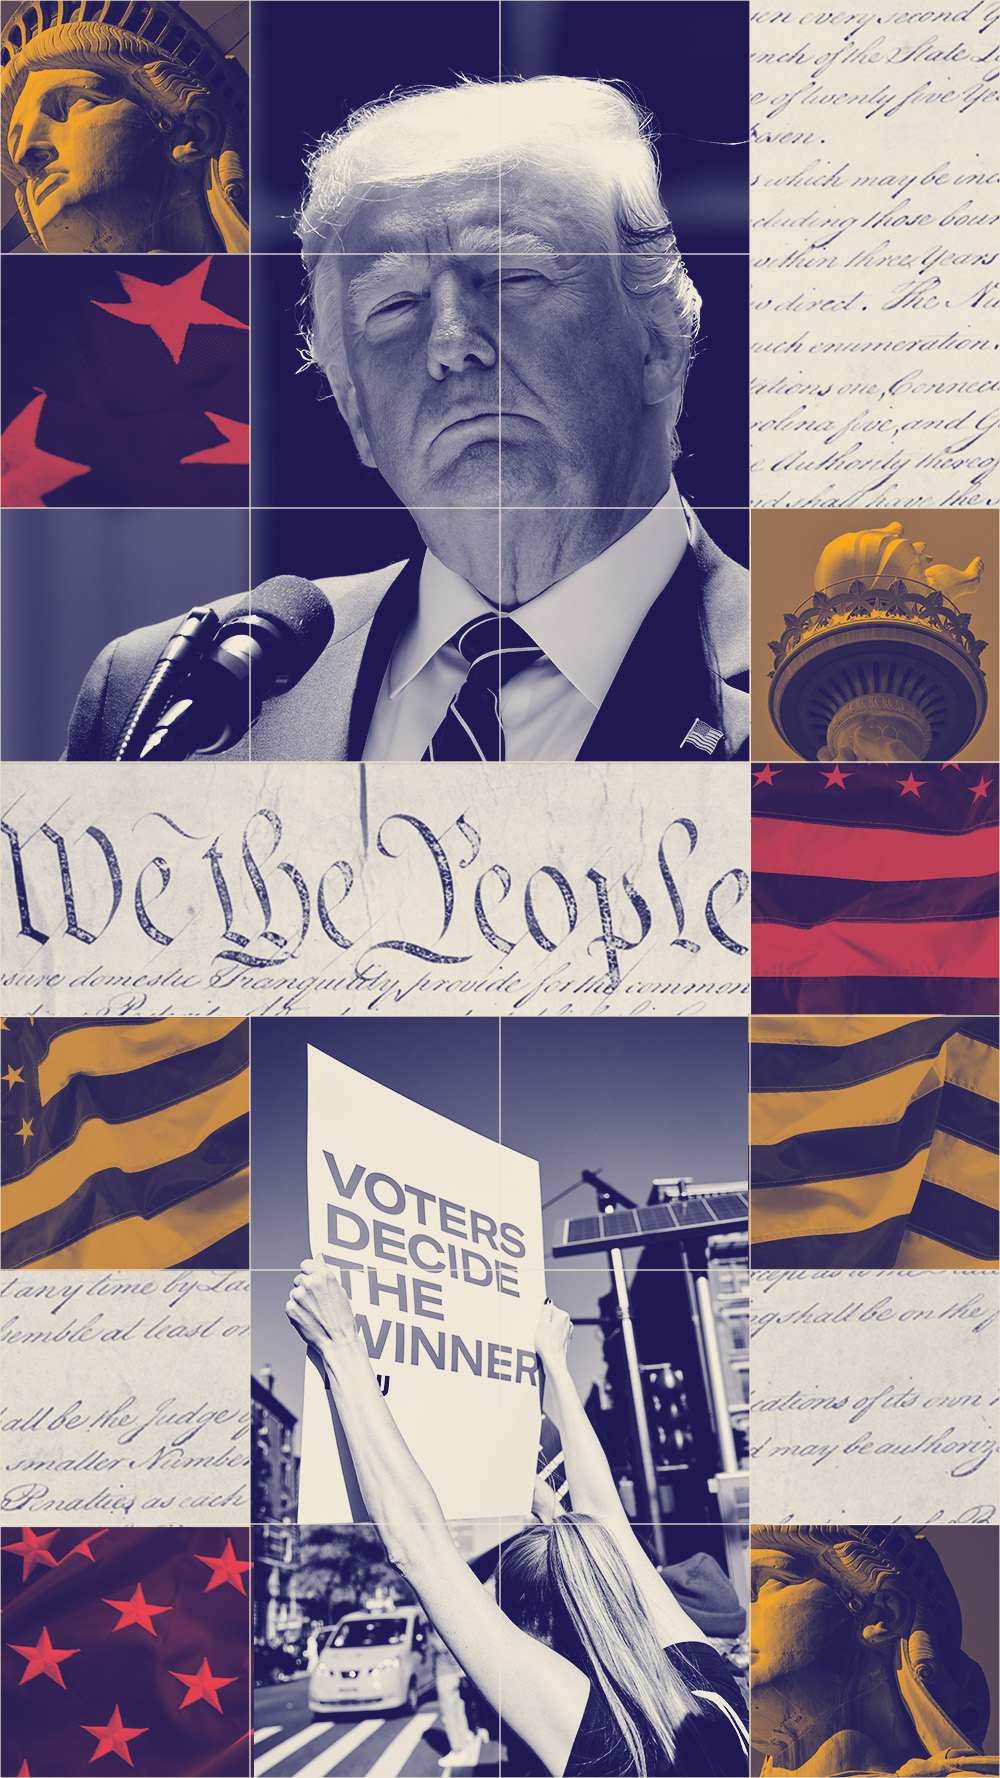 A graphic featuring Trump and imagery pertaining to voting rights.